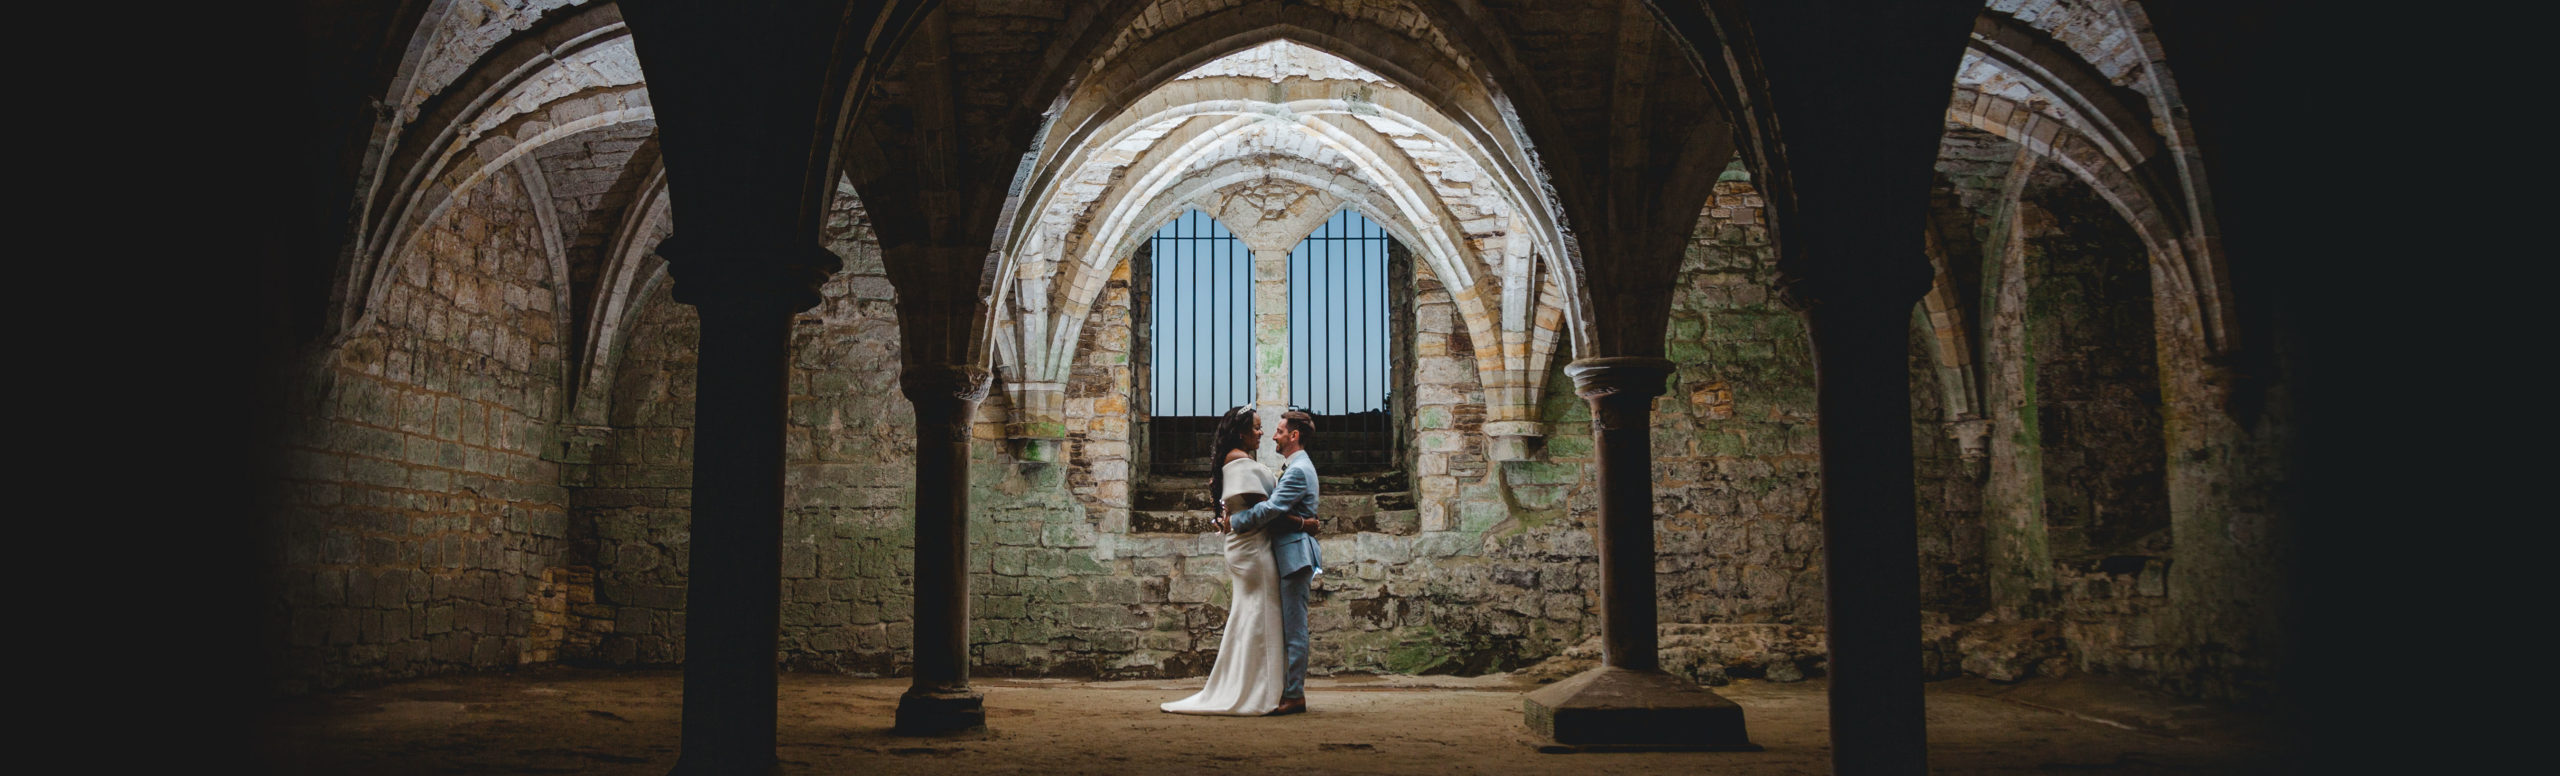 Bride and Groom at Battle Abbey